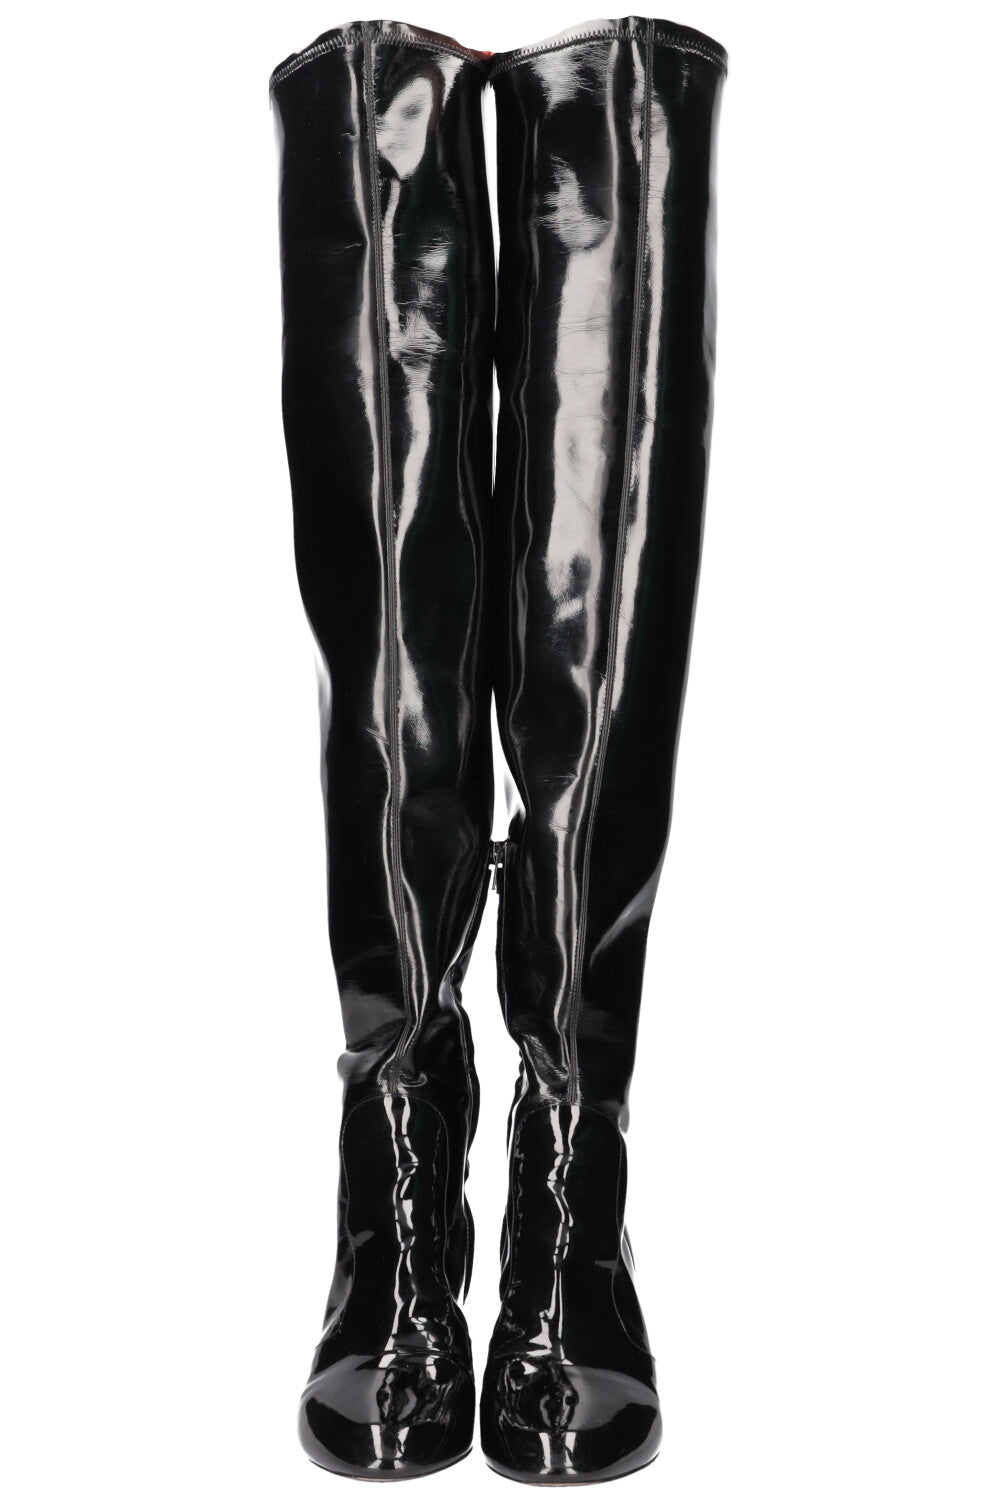 LOUIS VUITTON 2017 Patent Leather Over Knee Boots Black